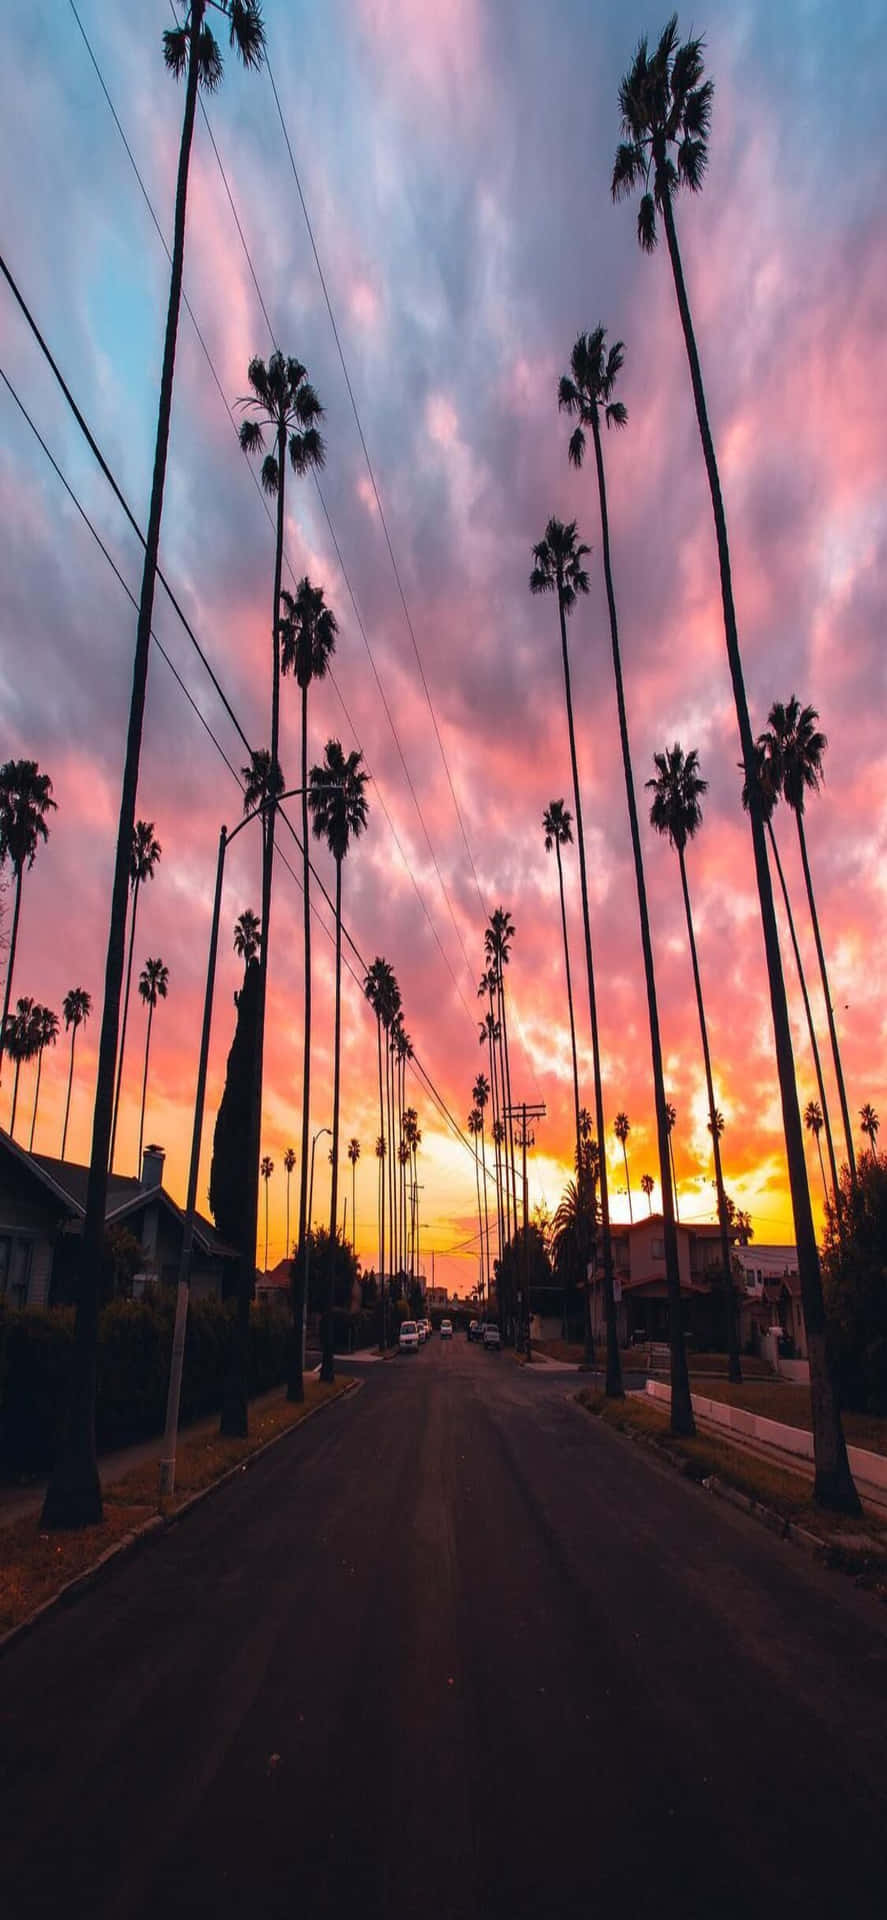 Download A Street With Palm Trees And A Colorful Sunset | Wallpapers.com